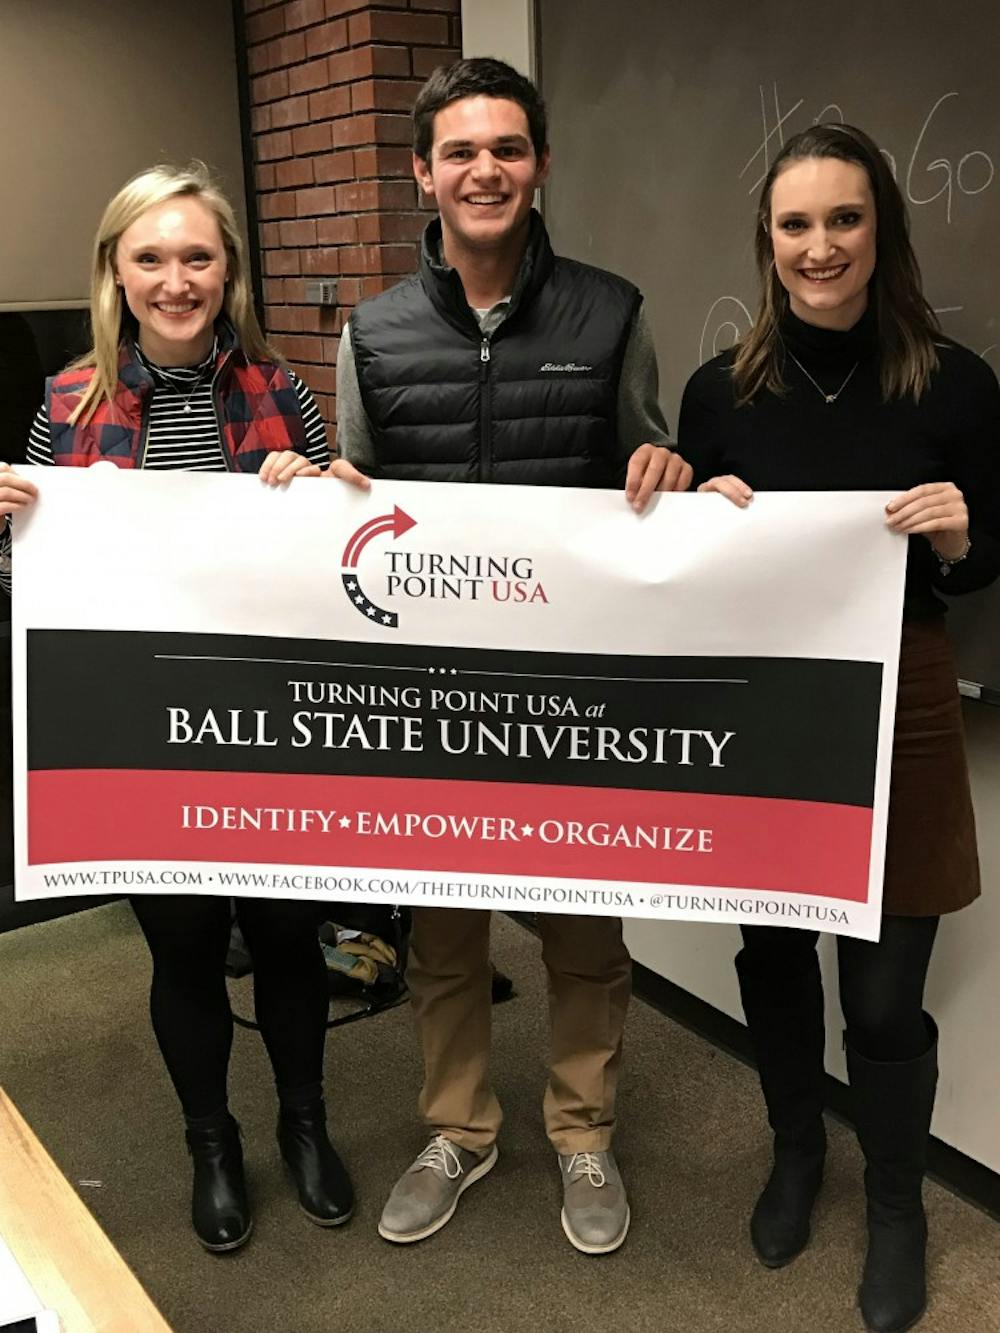 <p>(From left) Caroline Owens, Luke Weise and Merre Owens display the new banner for Turning Point USA. TPUSA is a new club at Ball State that aims to&nbsp;talk about political issues in a civil, nonpartisan manner. Luke Weise // Photo Provided</p>